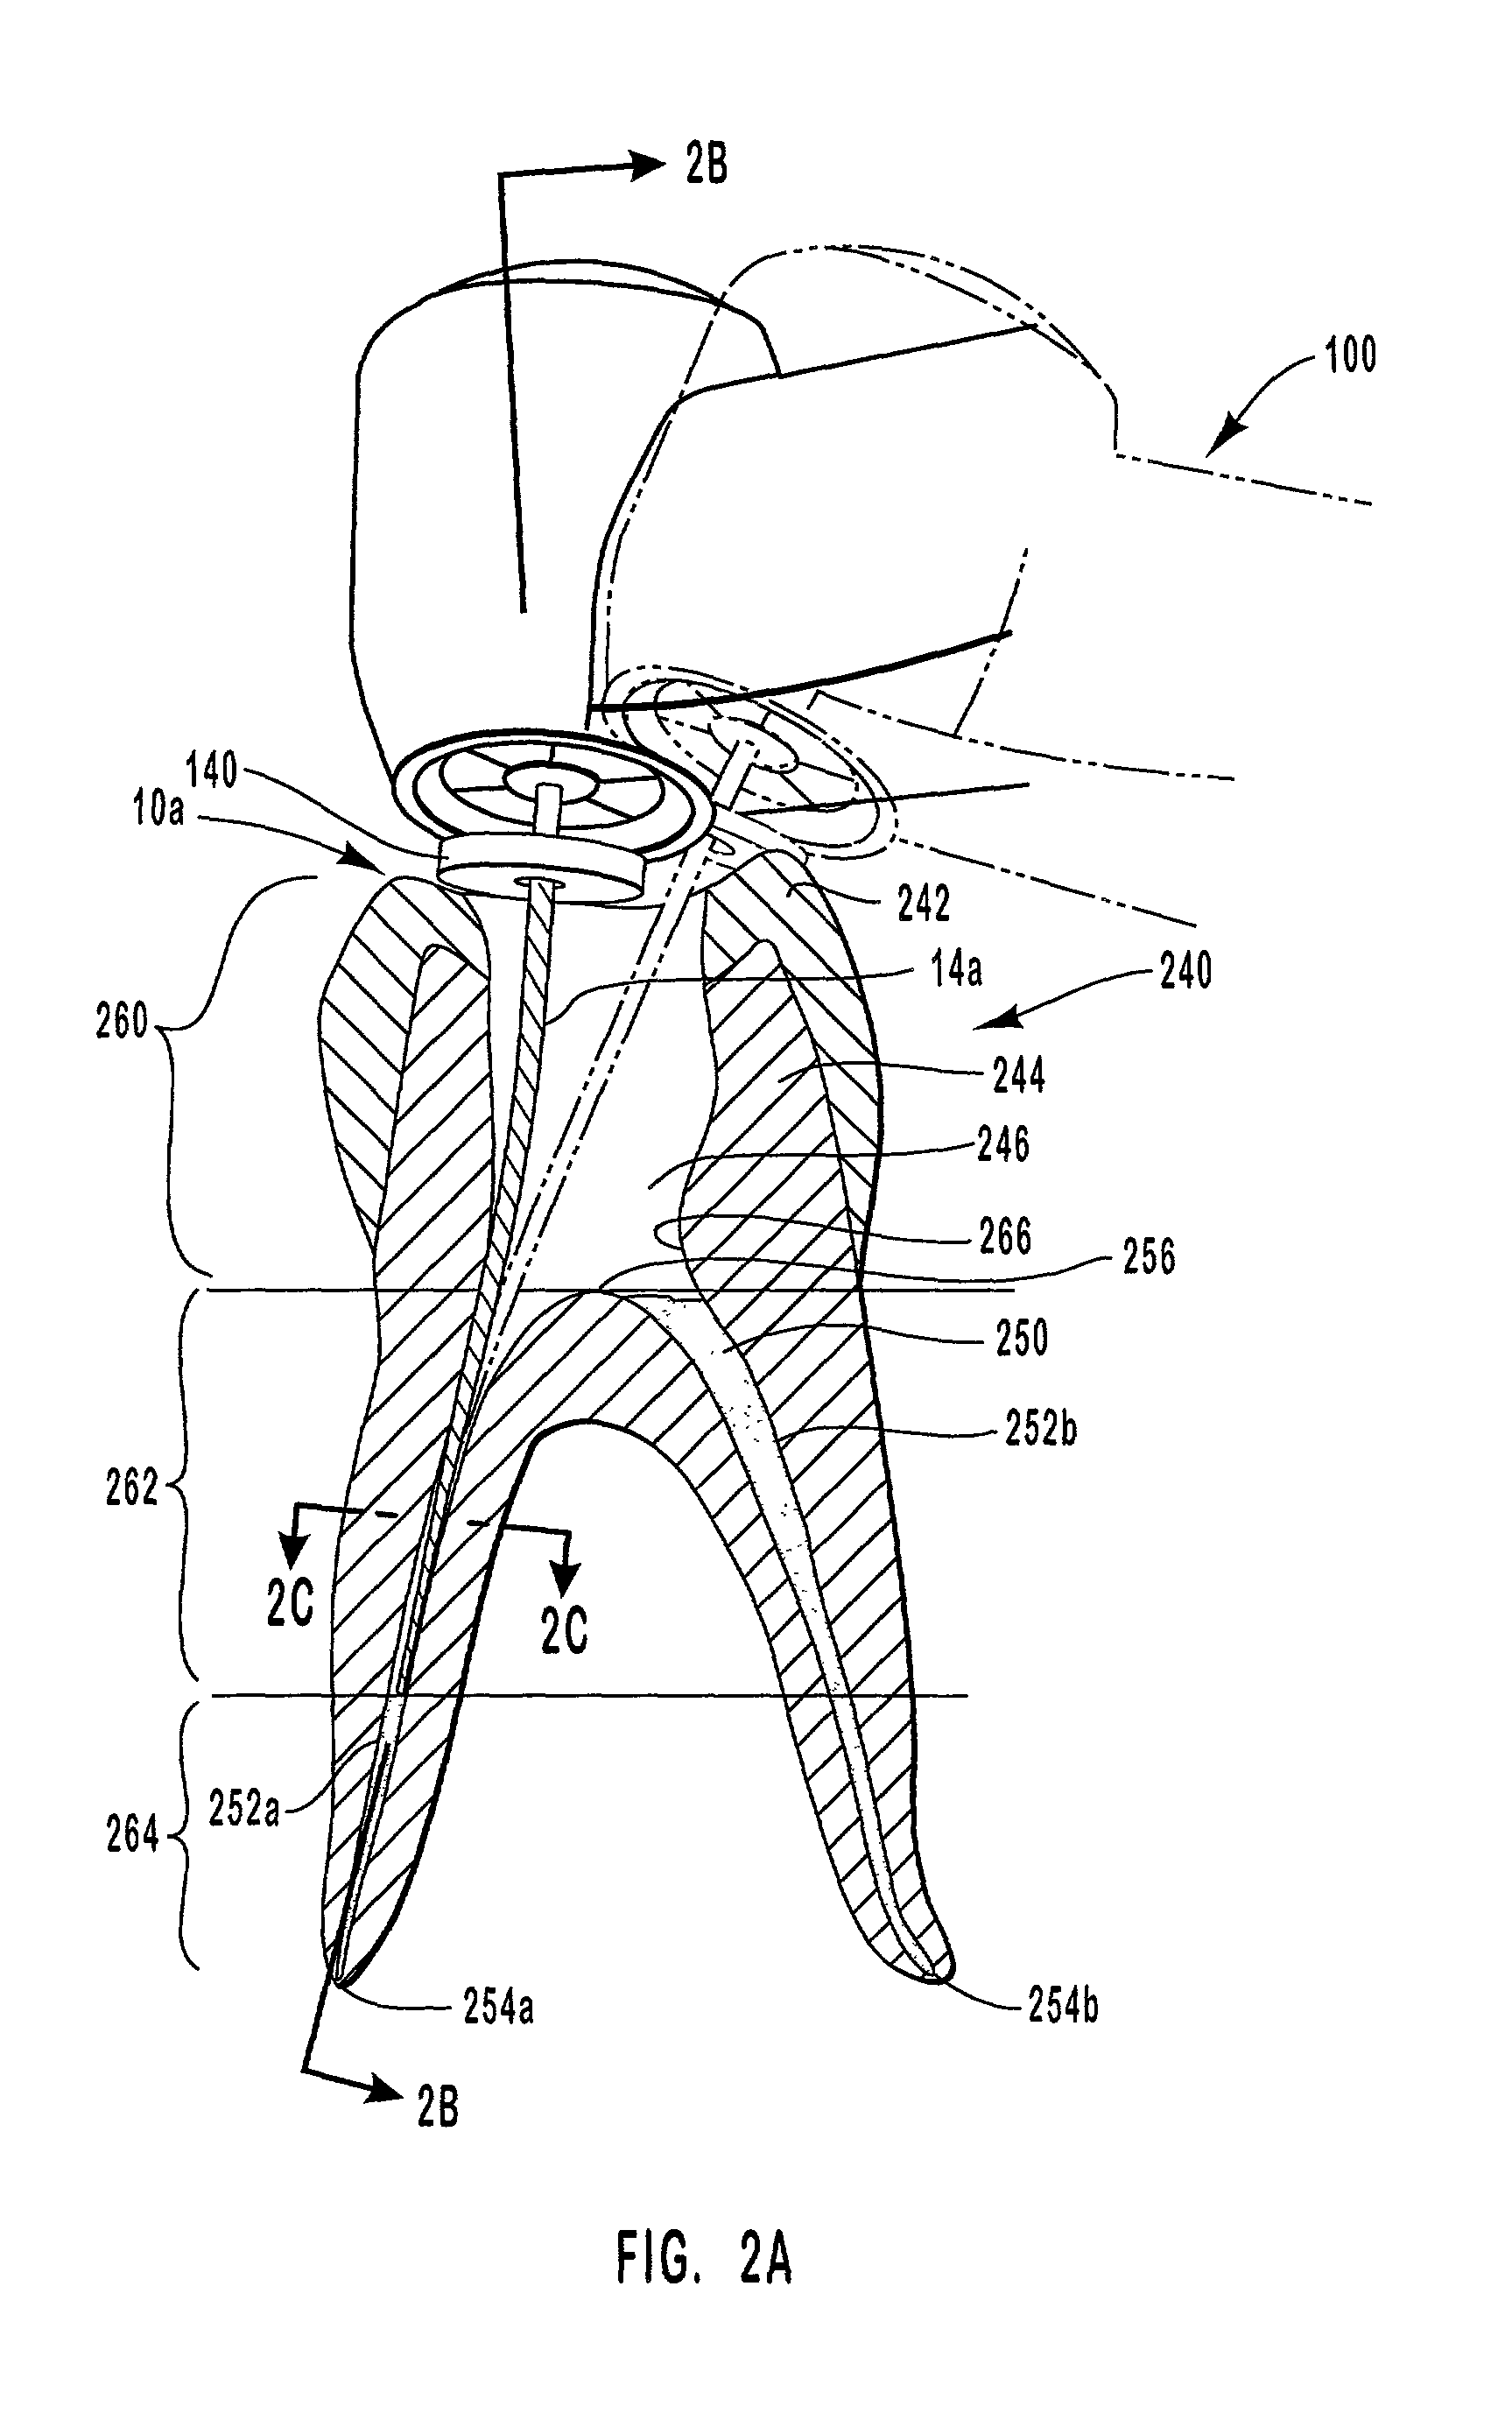 Endodontic systems and methods for preparing apical portions of root canals with a set of files having large tapers